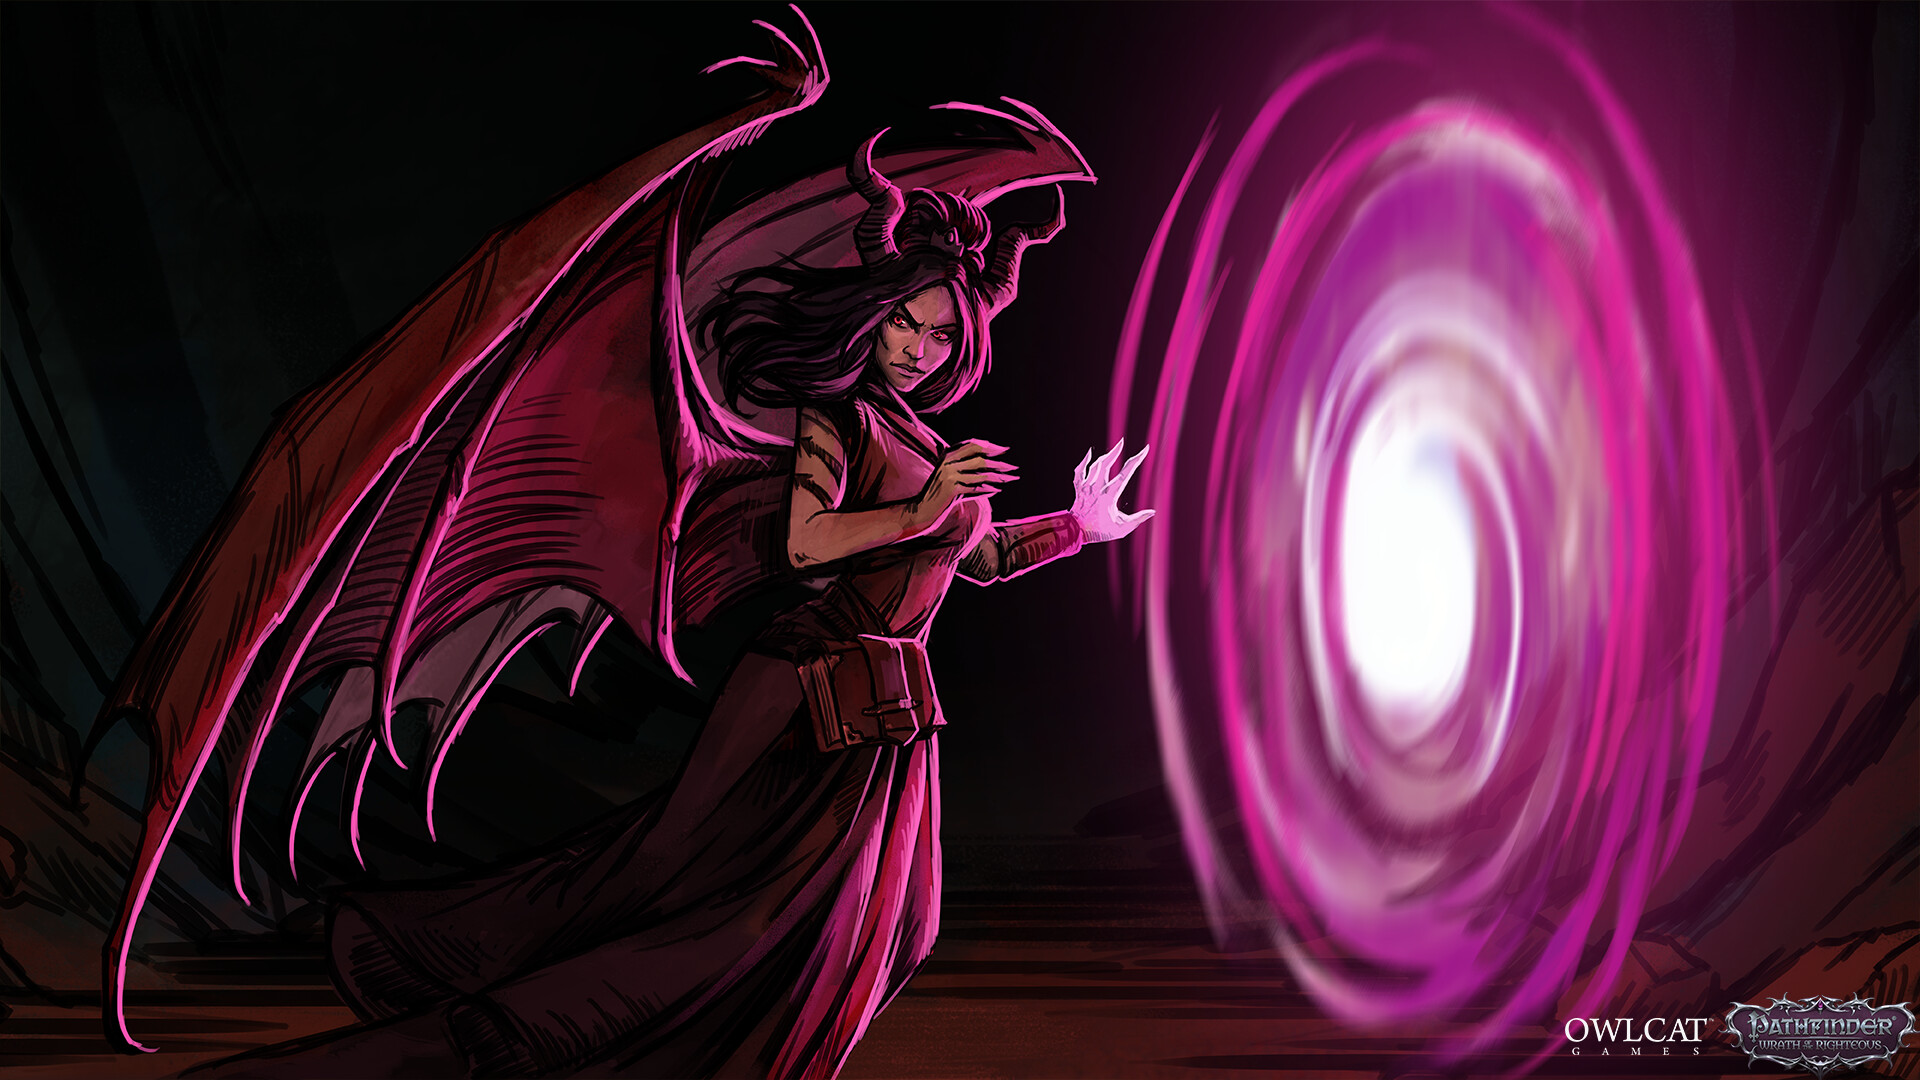 Pathfinder: Wrath of the Righteous HD wallpaper featuring a mystical character casting a spell with a glowing purple portal, perfect for desktop background.